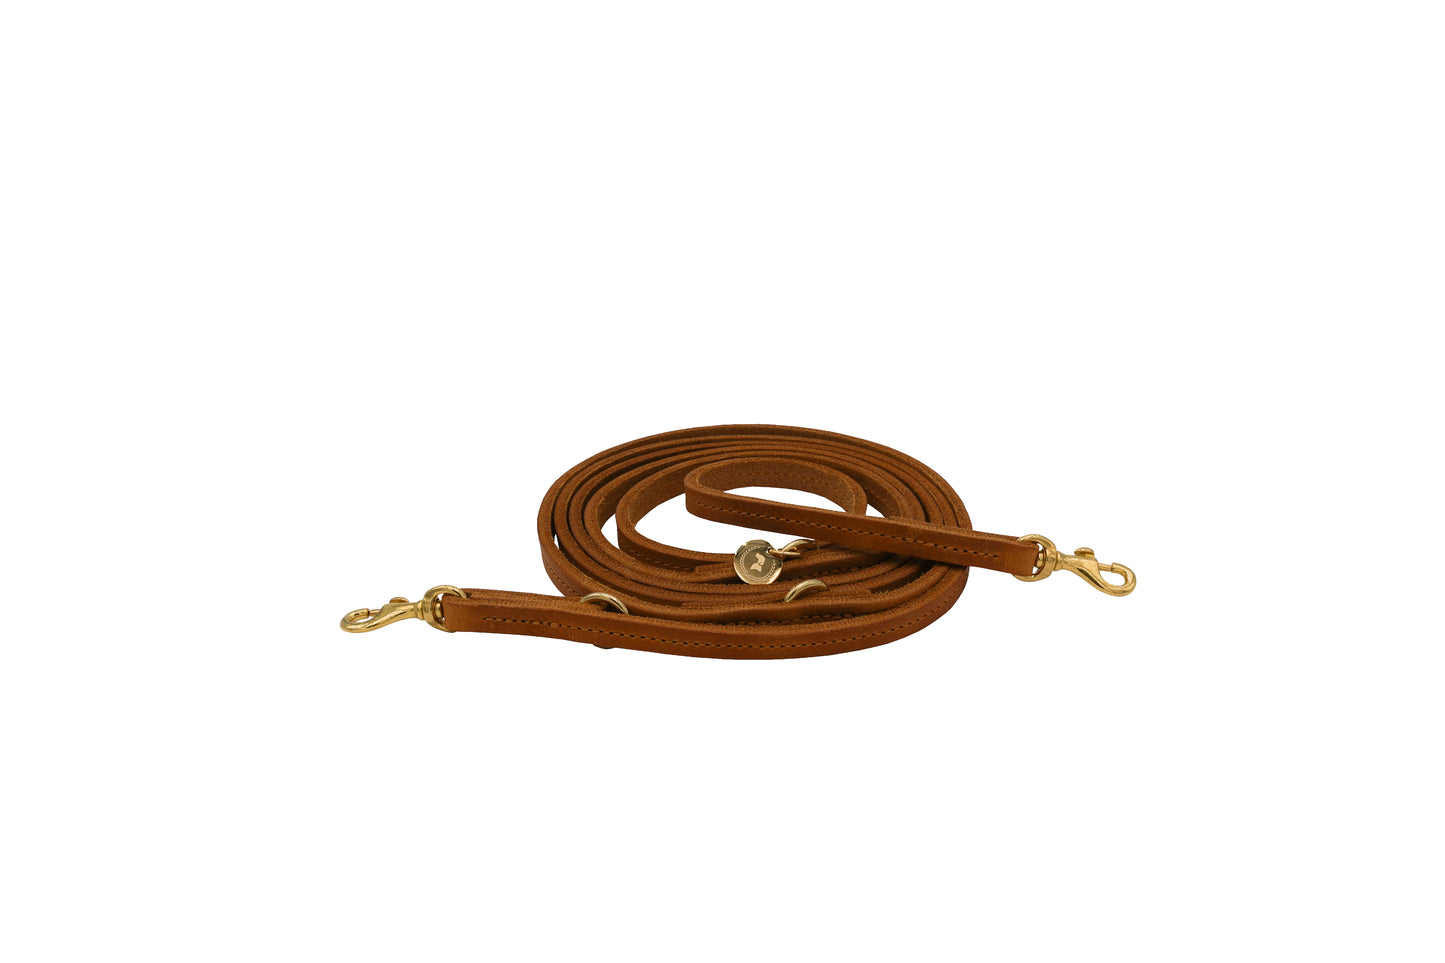 Grease leather leash Classic Small cognac